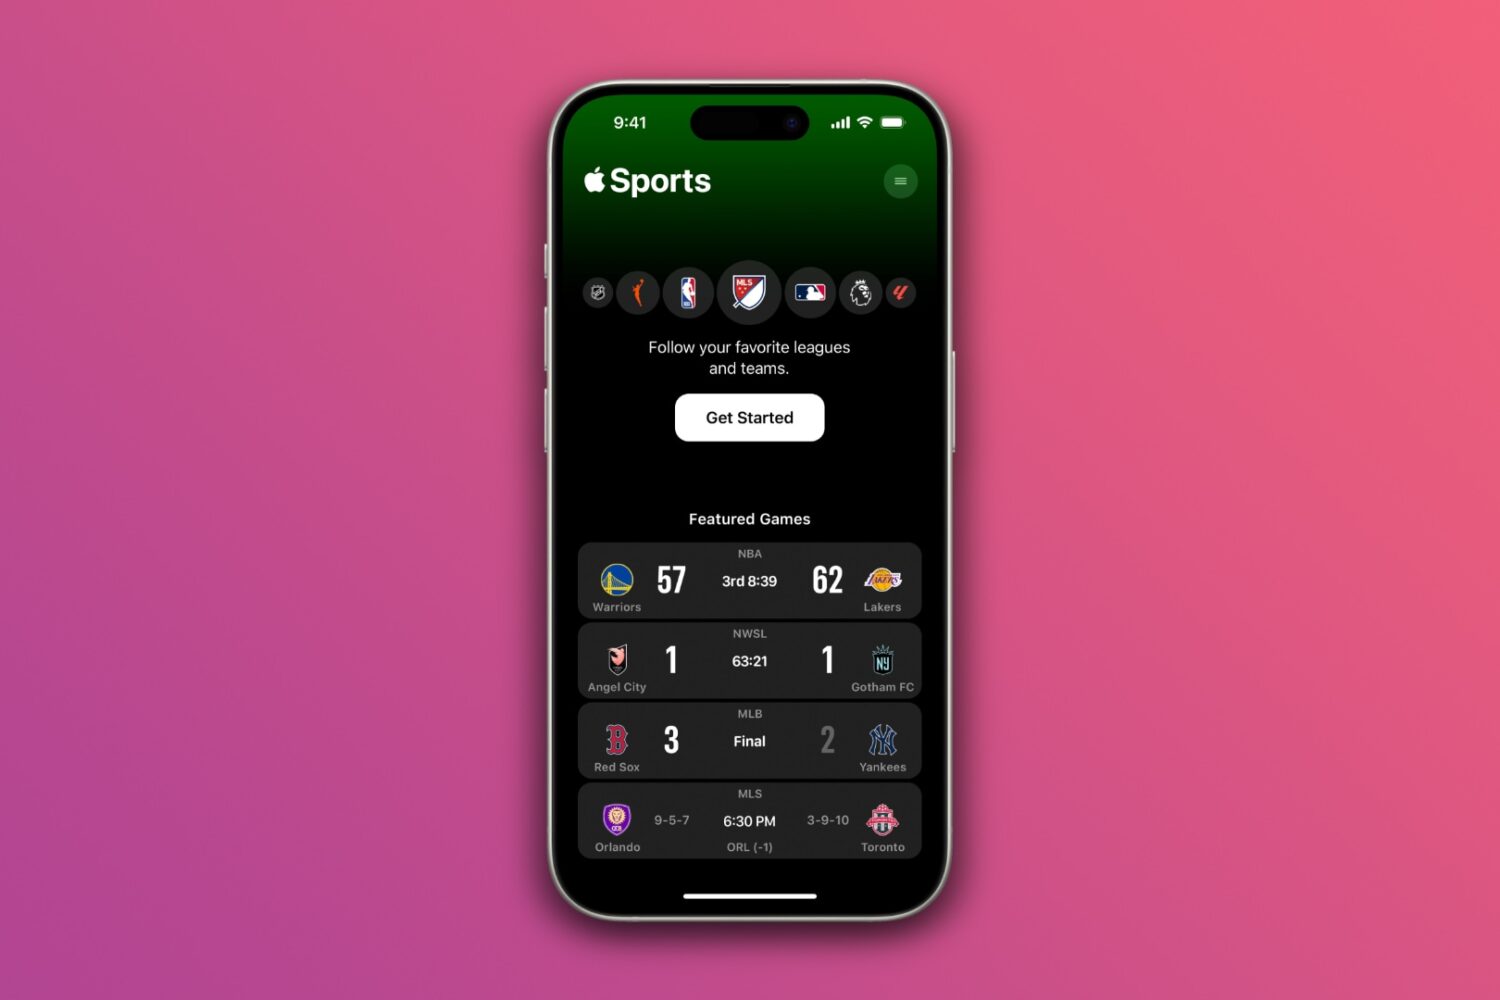 Apple Sports app showing the welcome screen